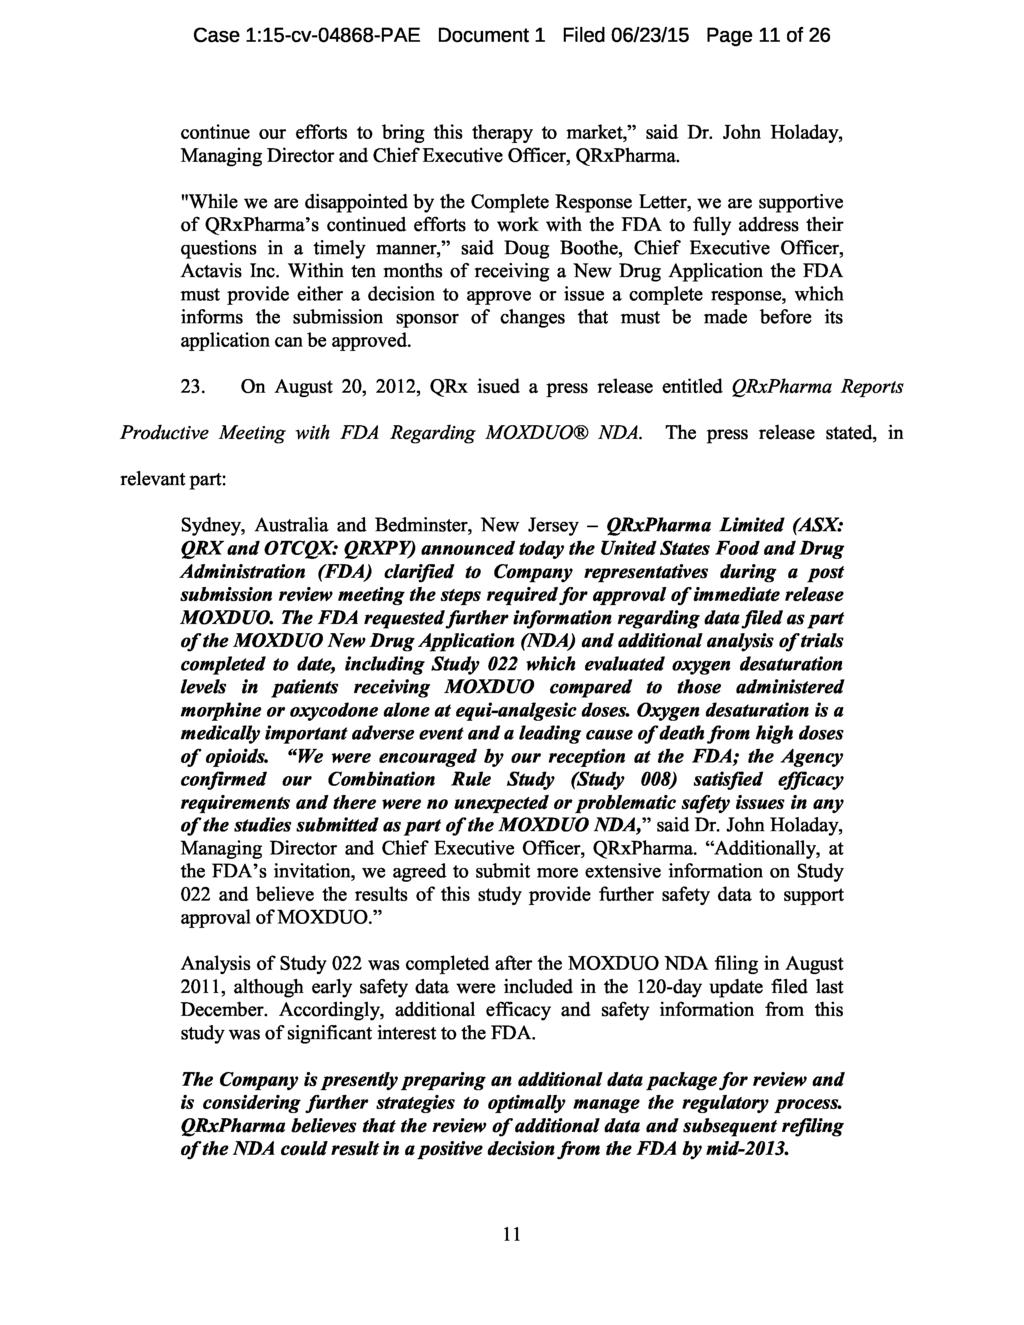 Case 1:15-cv-04868-PAE Document 1 Filed 06/23/15 Page 11 of 26 continue our efforts to bring this therapy to market, said Dr. John Holaday, Managing Director and Chief Executive Officer, QRxPharma.